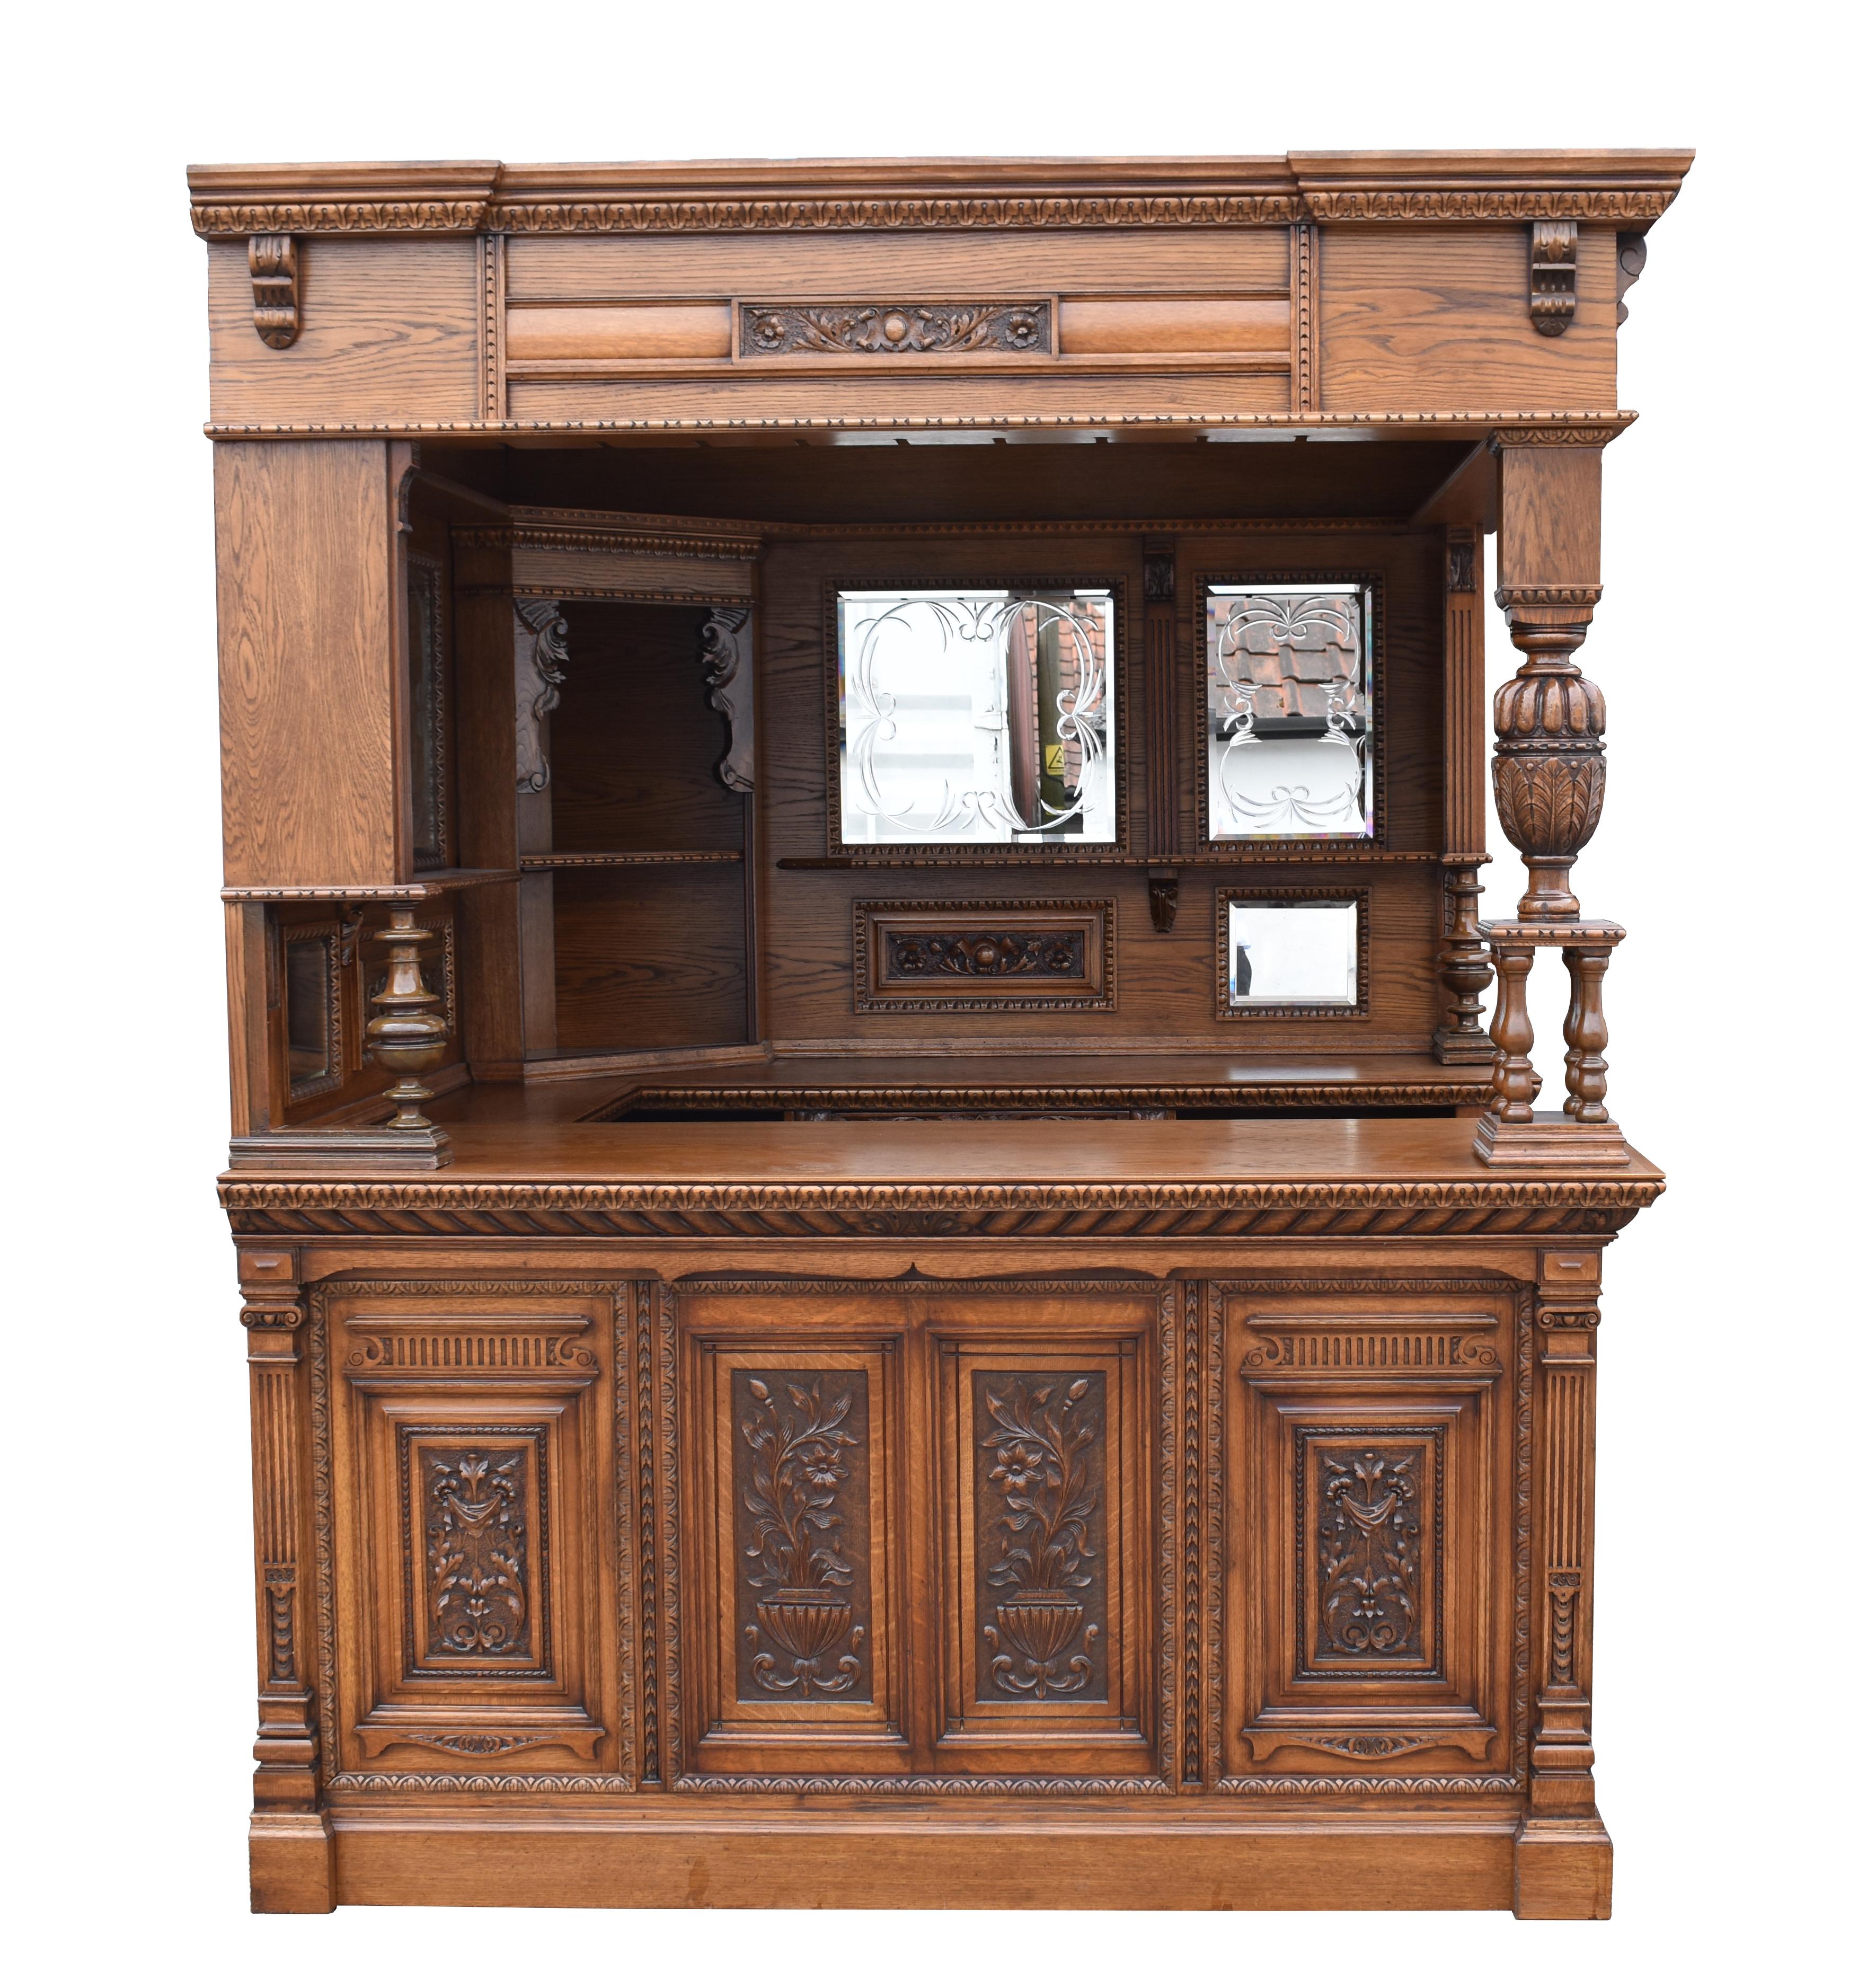 For sale is a good quality Victorian and later carved oak corner bar. The canopy having a stained glass ceiling, supported by two sections each with hand beveled and engraved mirrors and ornate carved panels. Below is a single drawer in the back bar